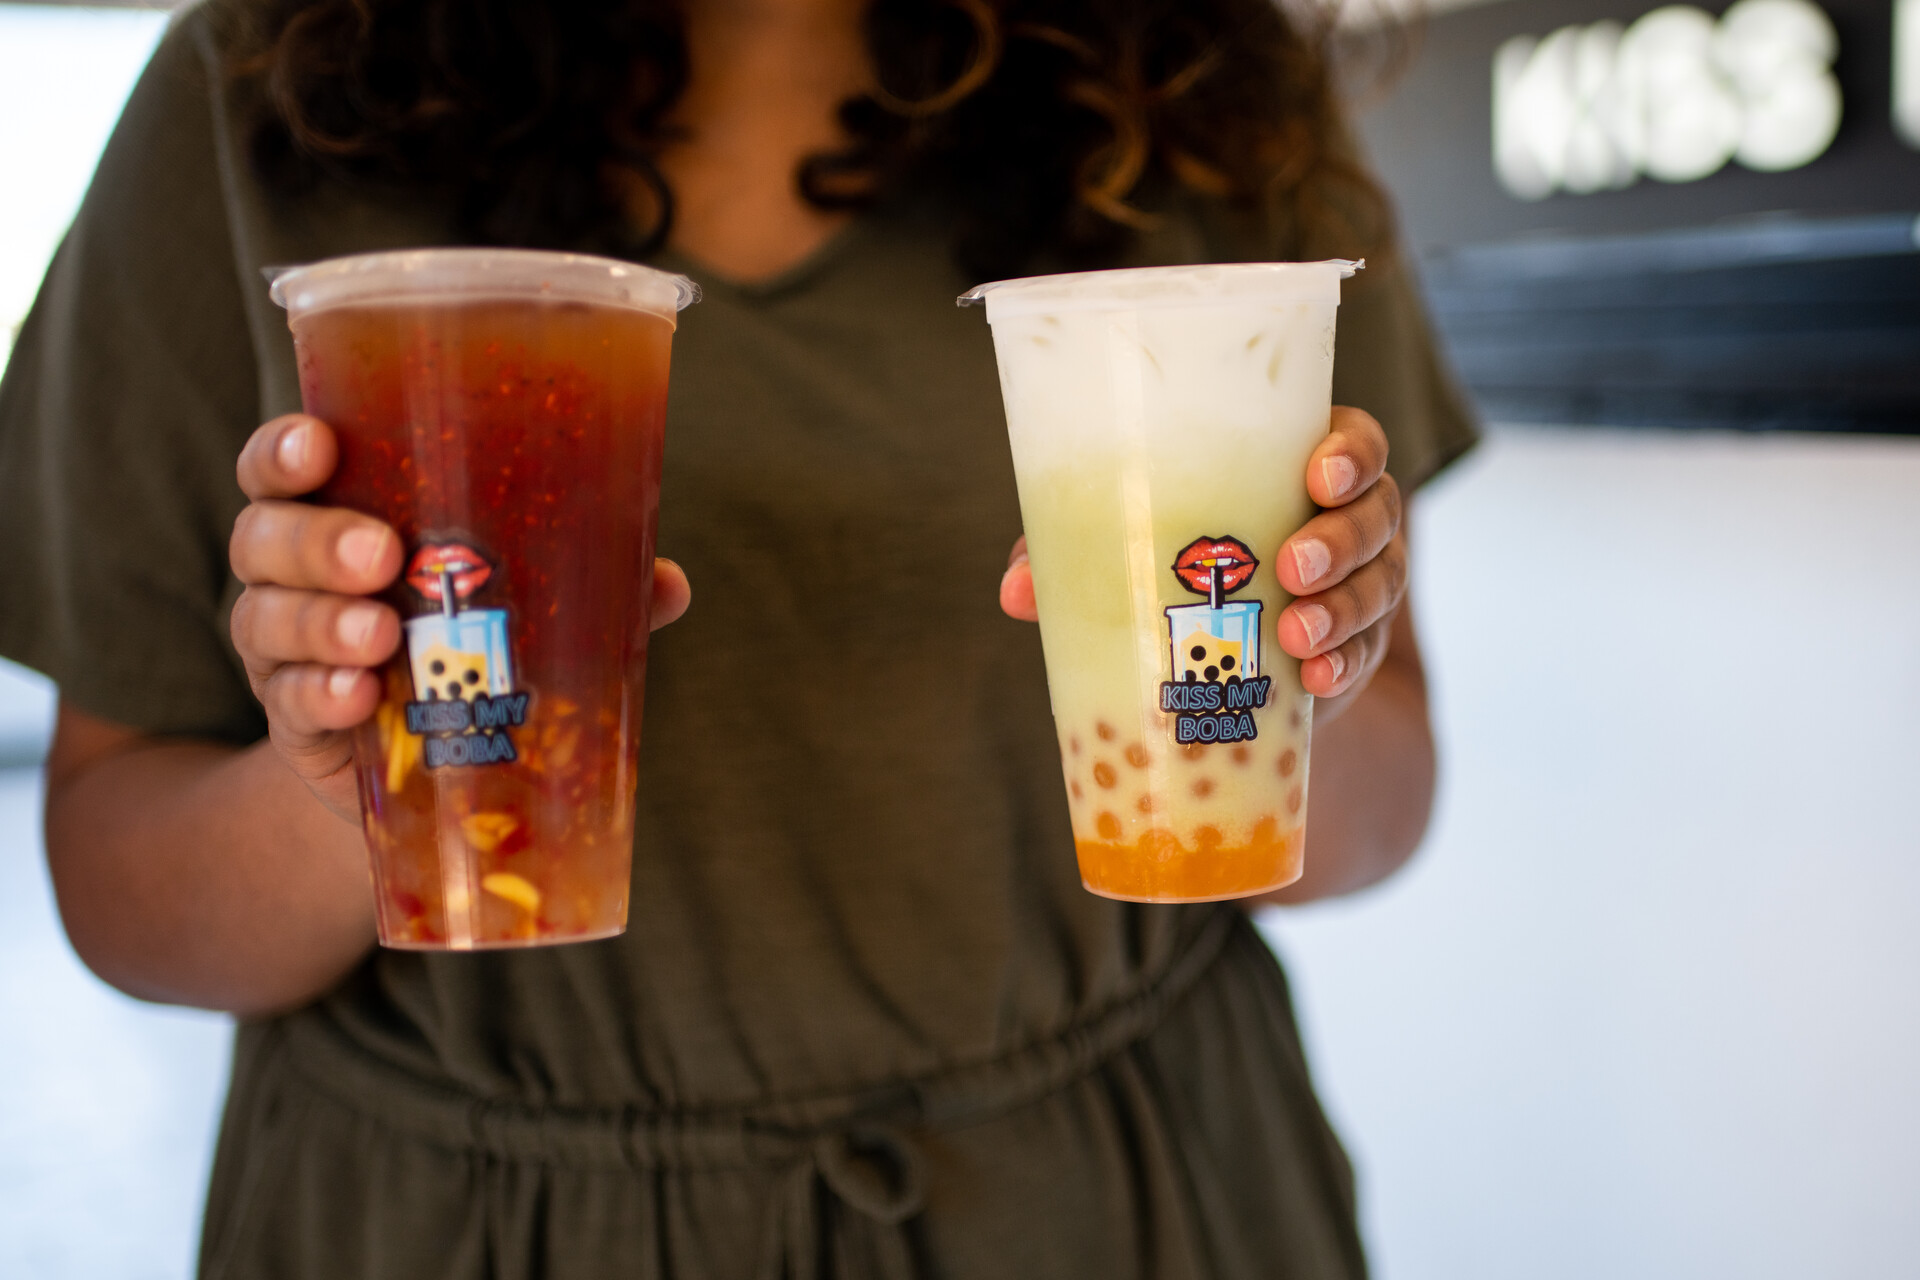 detail photo of two hands holding large plastic cups, one filled with a brownish reddish drink, the other a white and orange drink with boba at the bottom